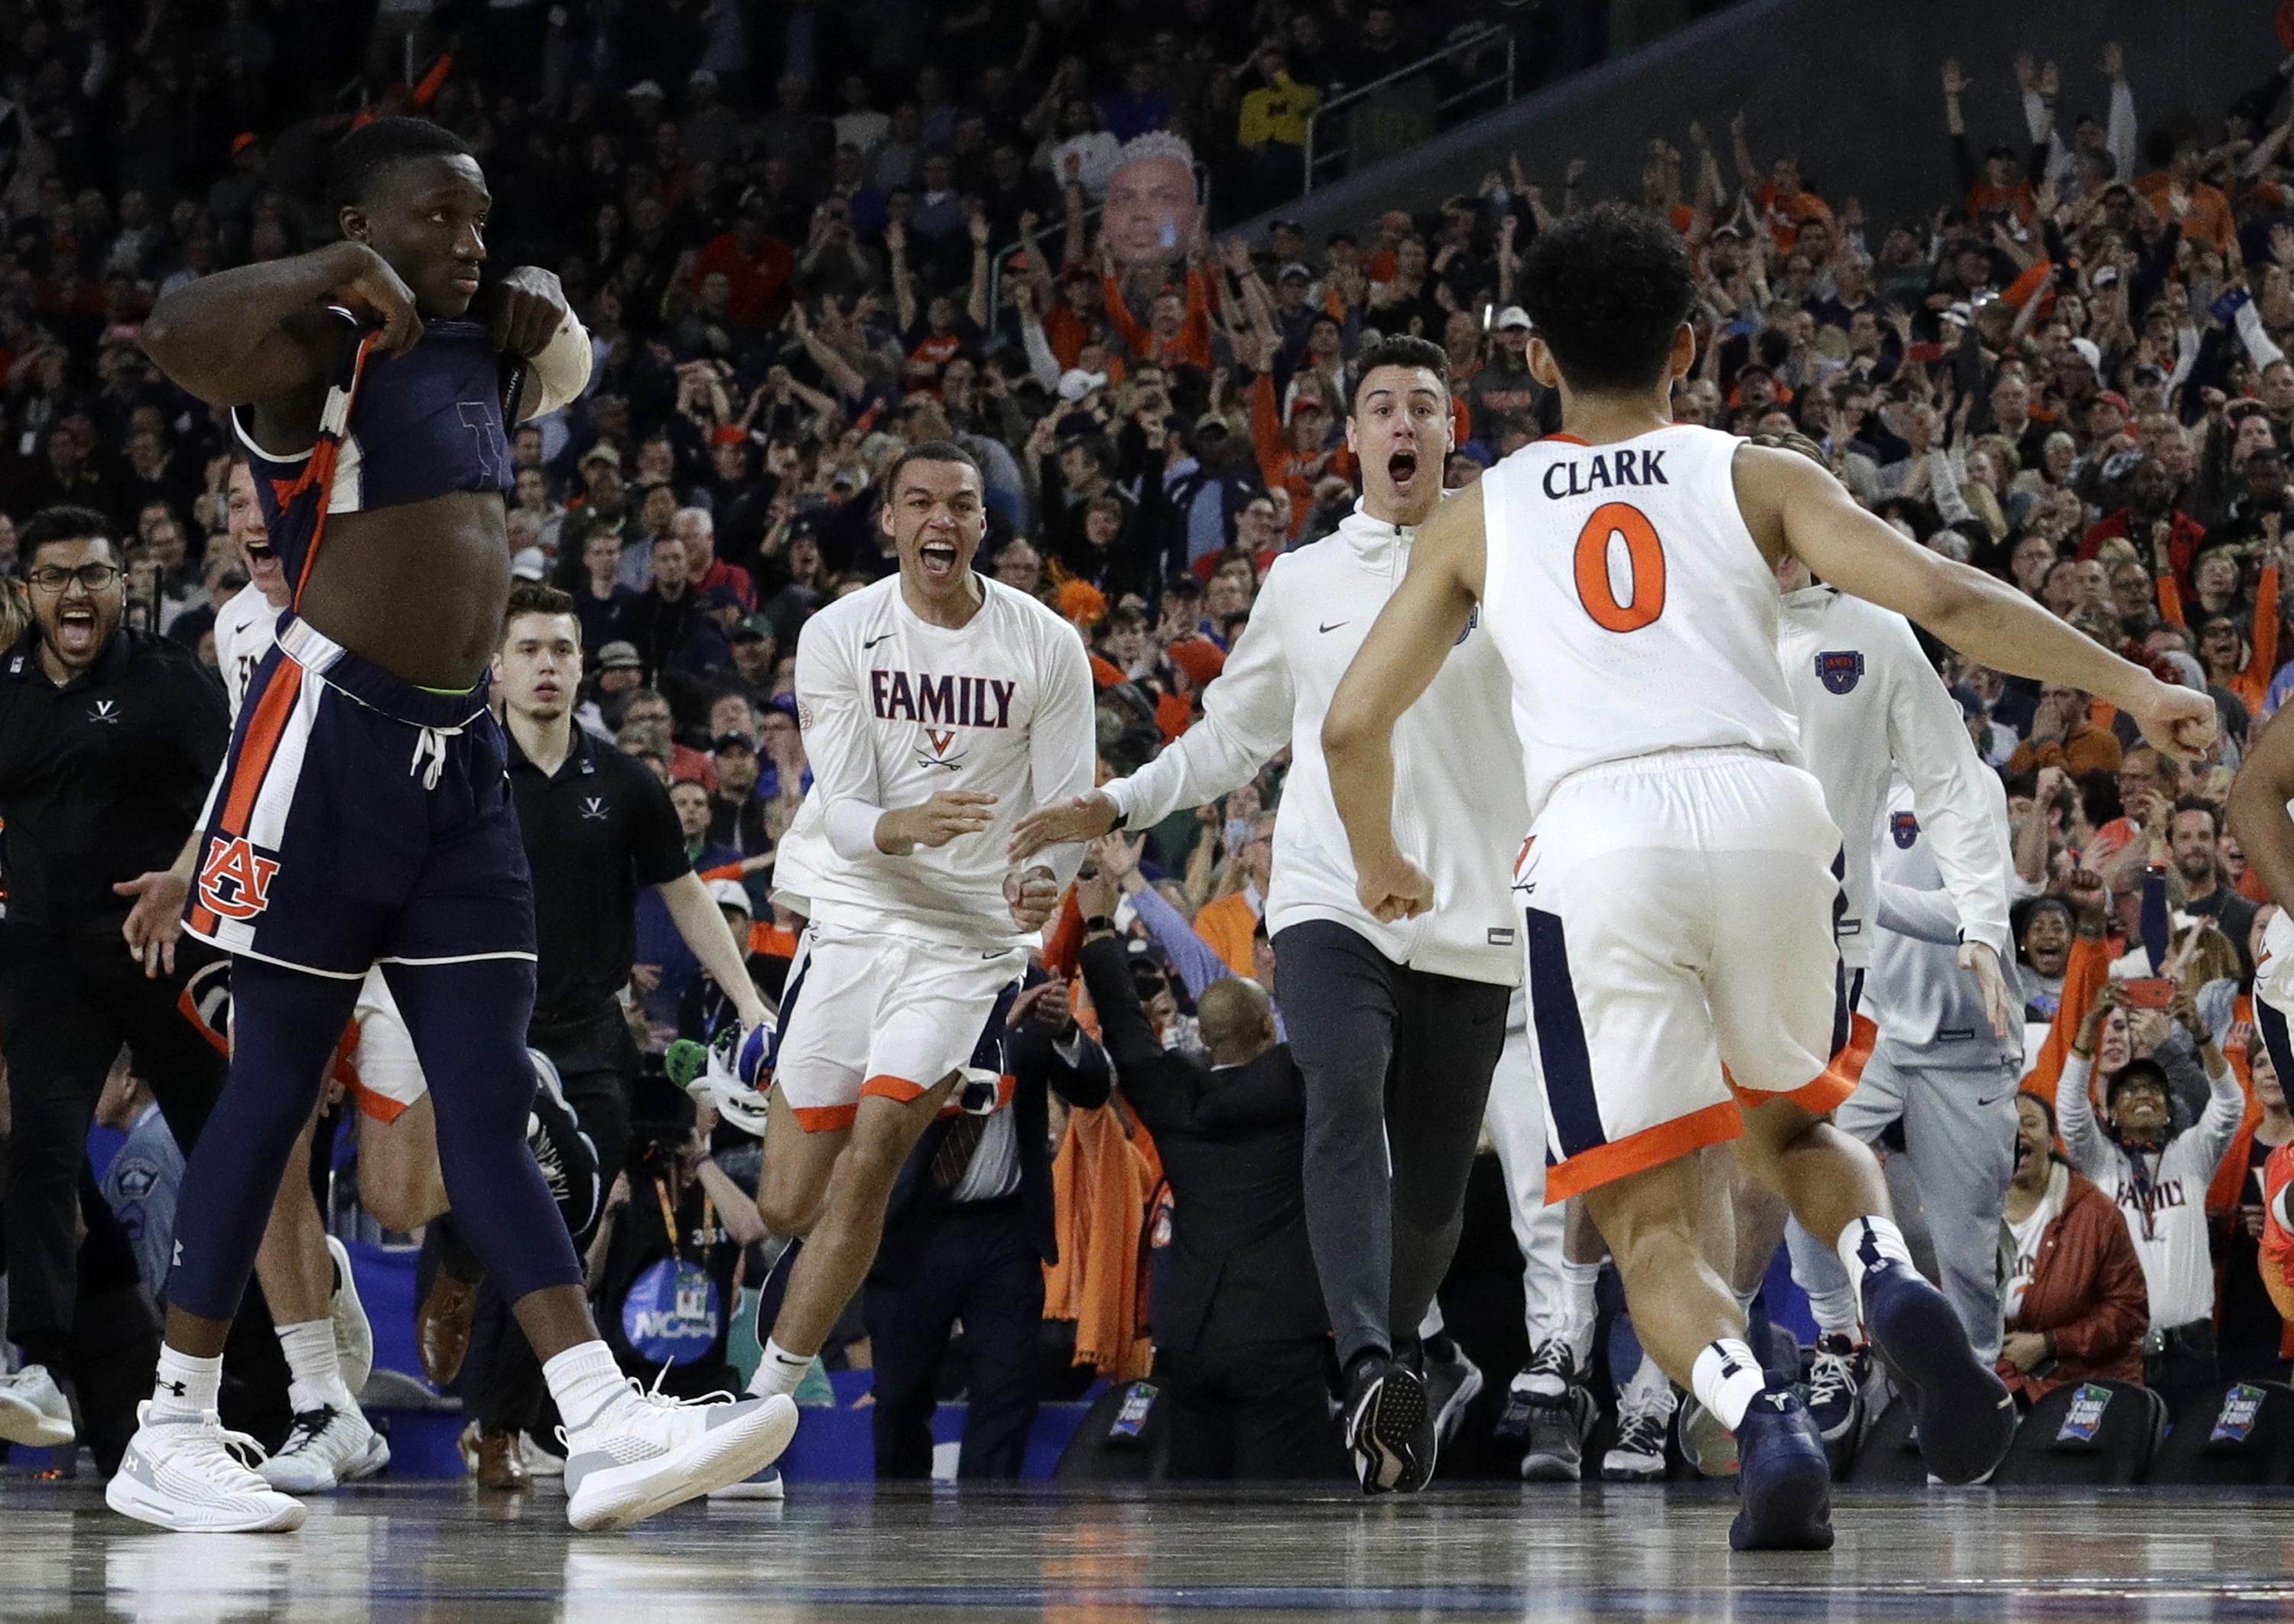 NCAA Latest: ACC clinches most wins for this tournament